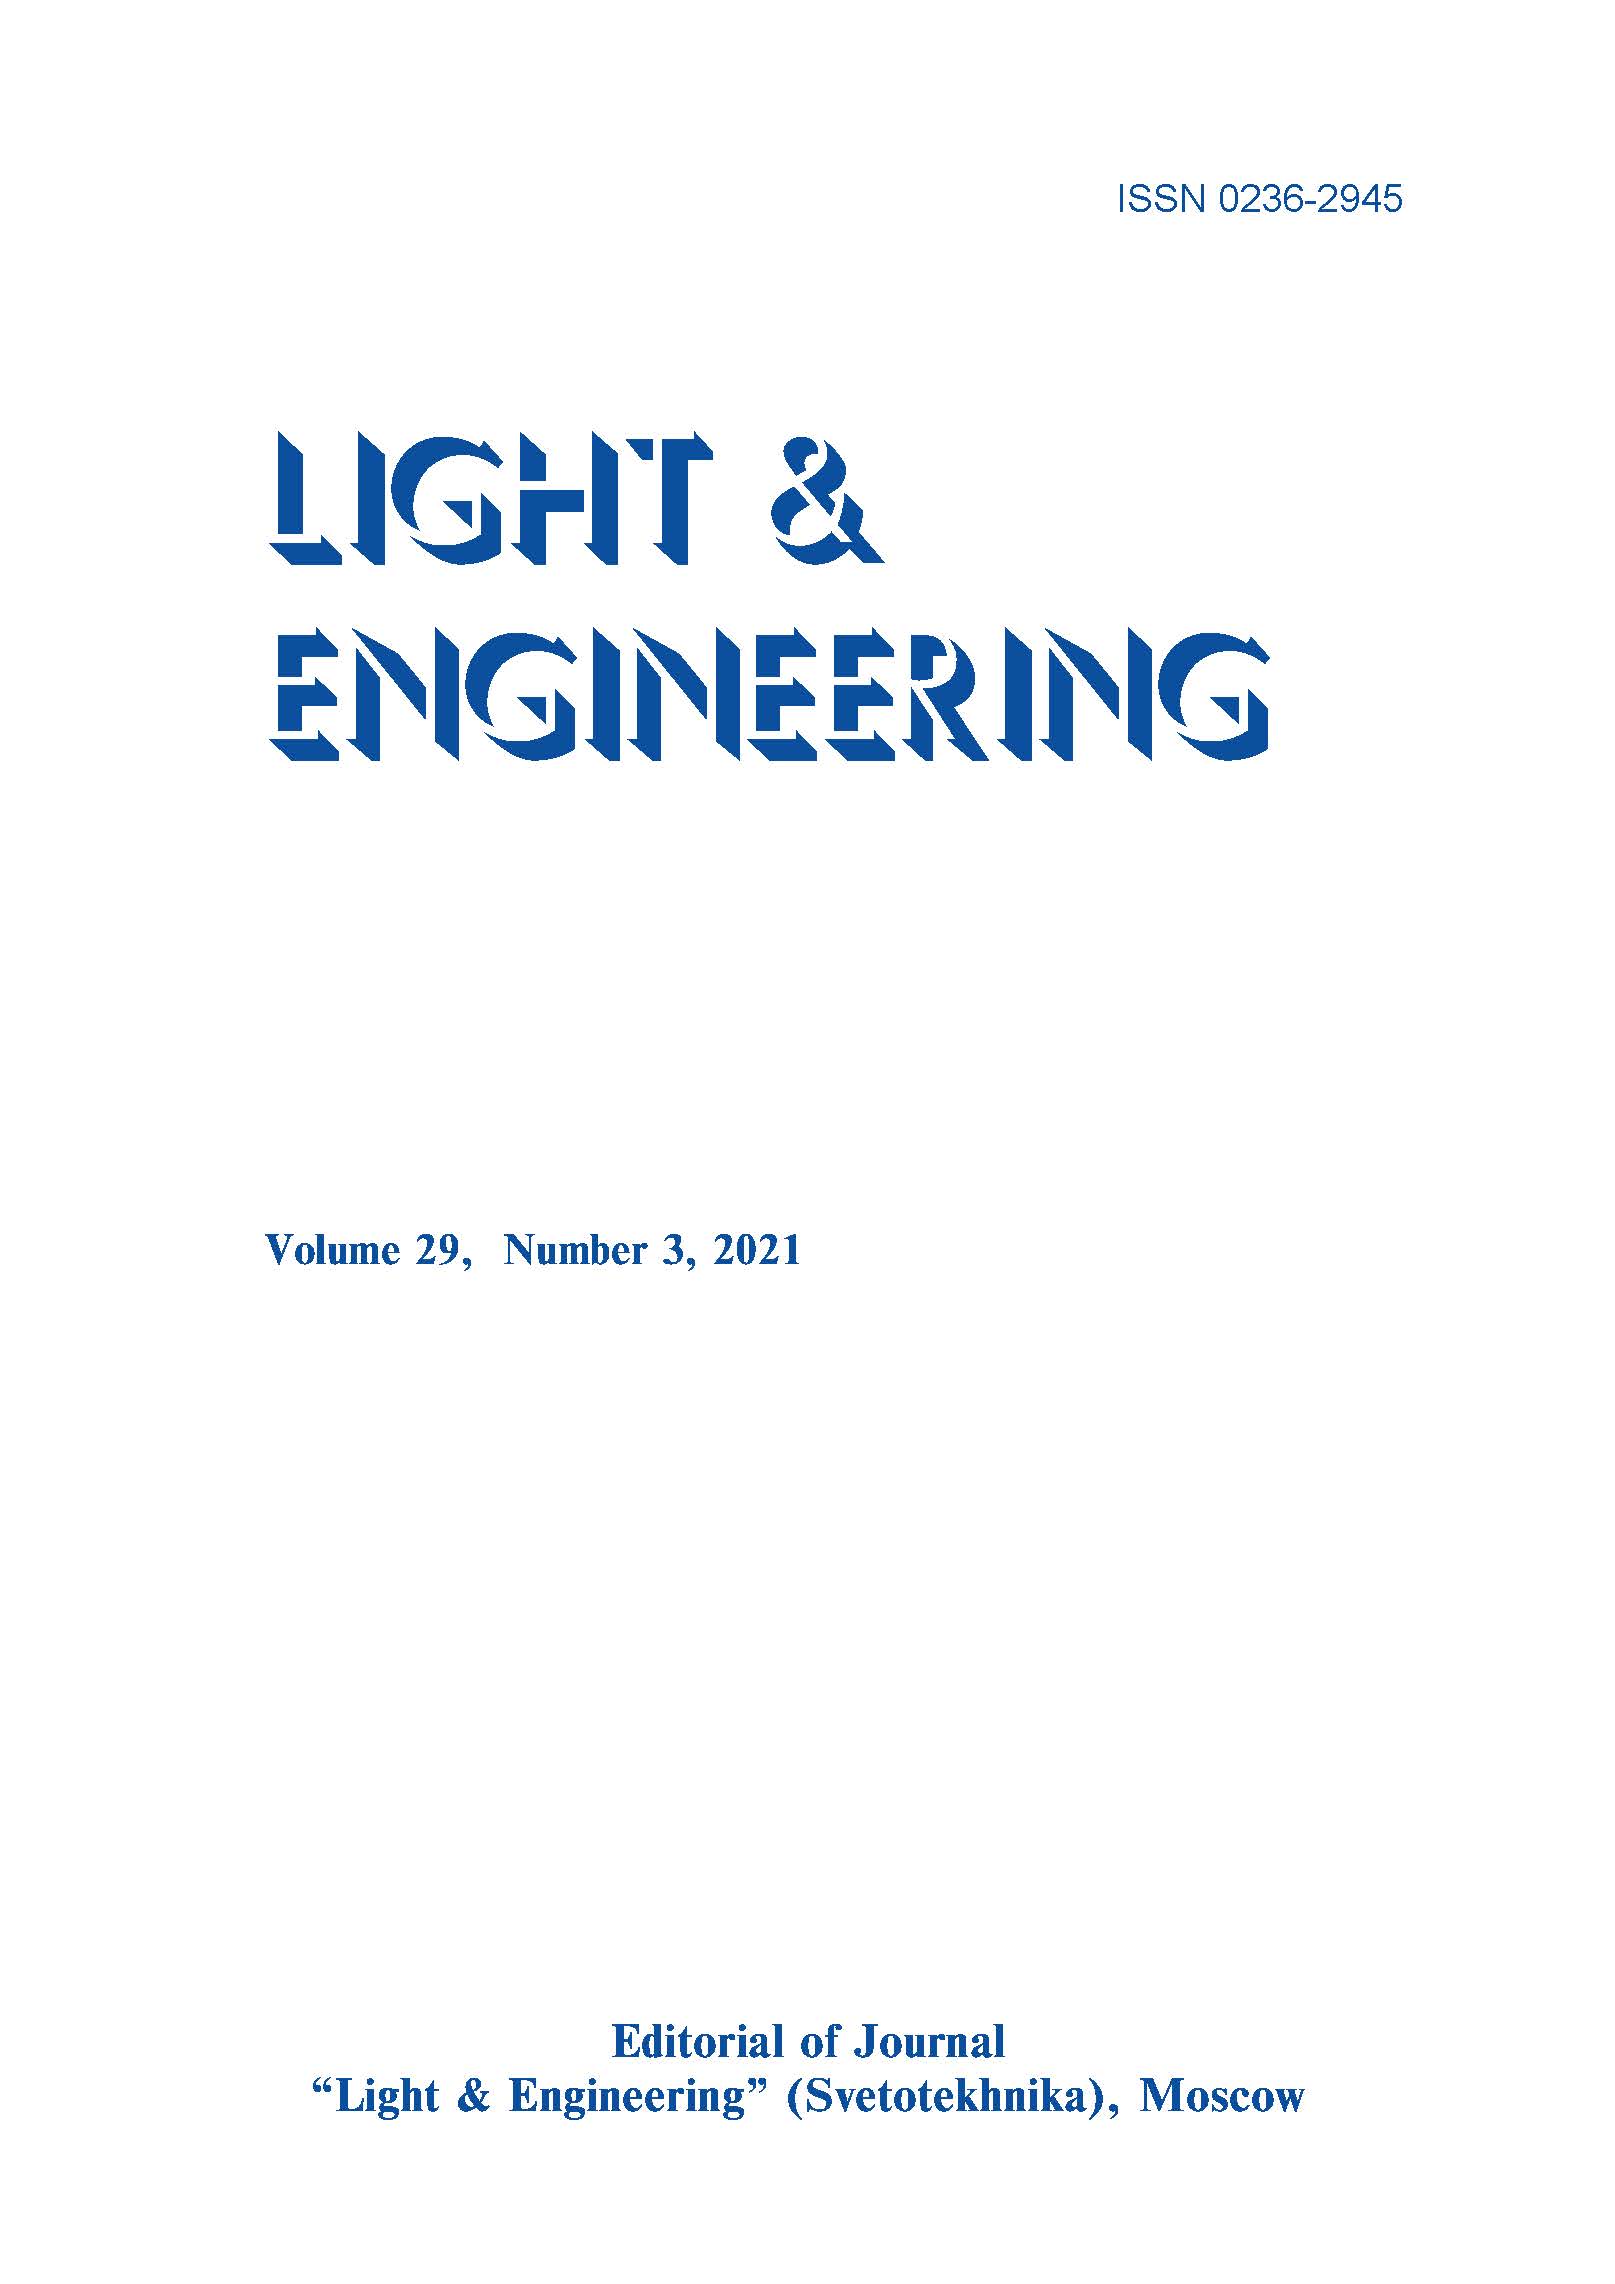 On The Hygienic Efficiency Of Lighting With Leds in Industrial Premises L&E, Vol. 29, No. 3, 2021